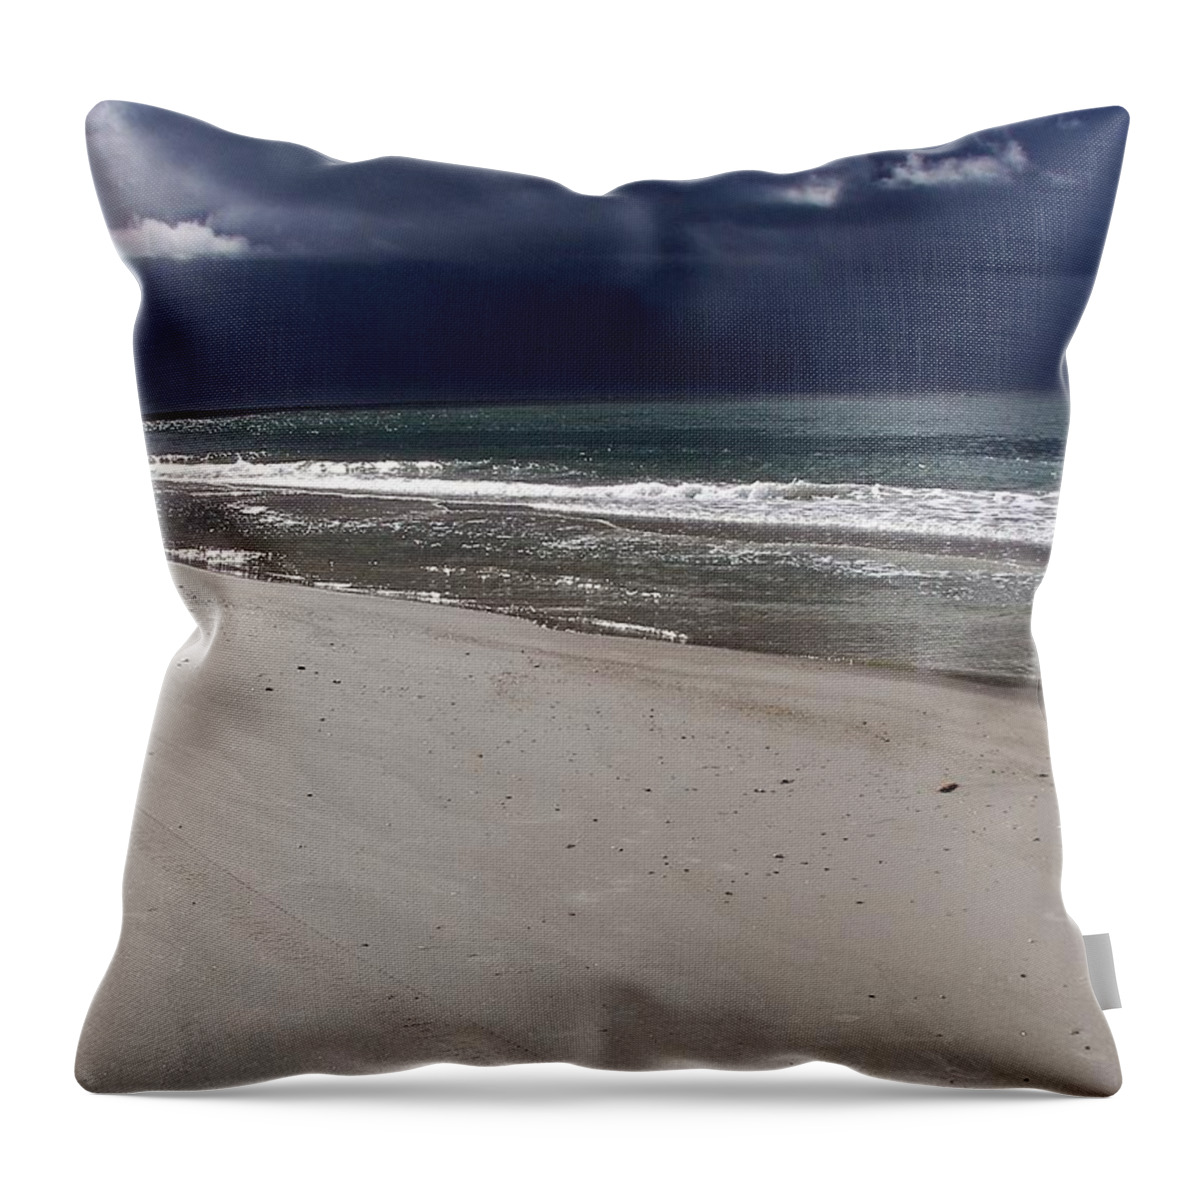 Topsail Island Throw Pillow featuring the photograph Time To Go by Karen Wiles